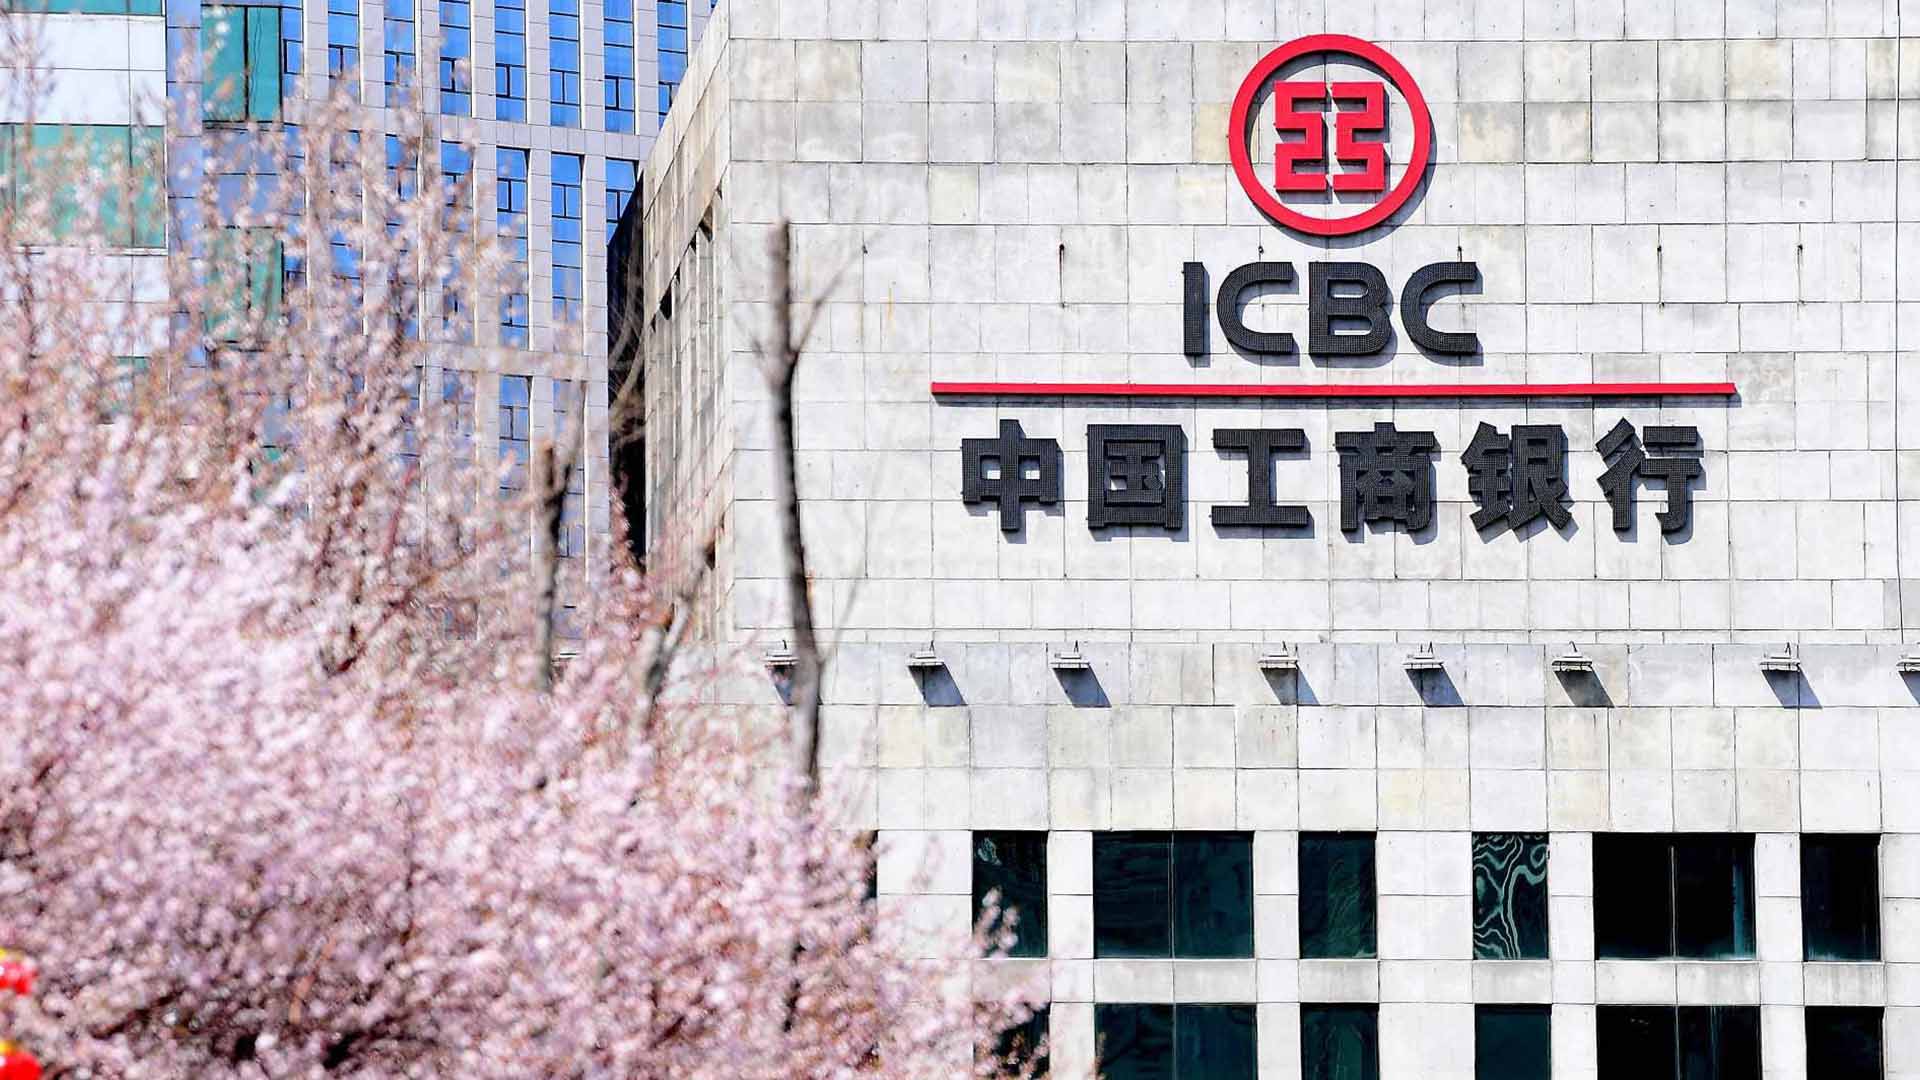 Industrial and Commercial Bank Of China Ltd